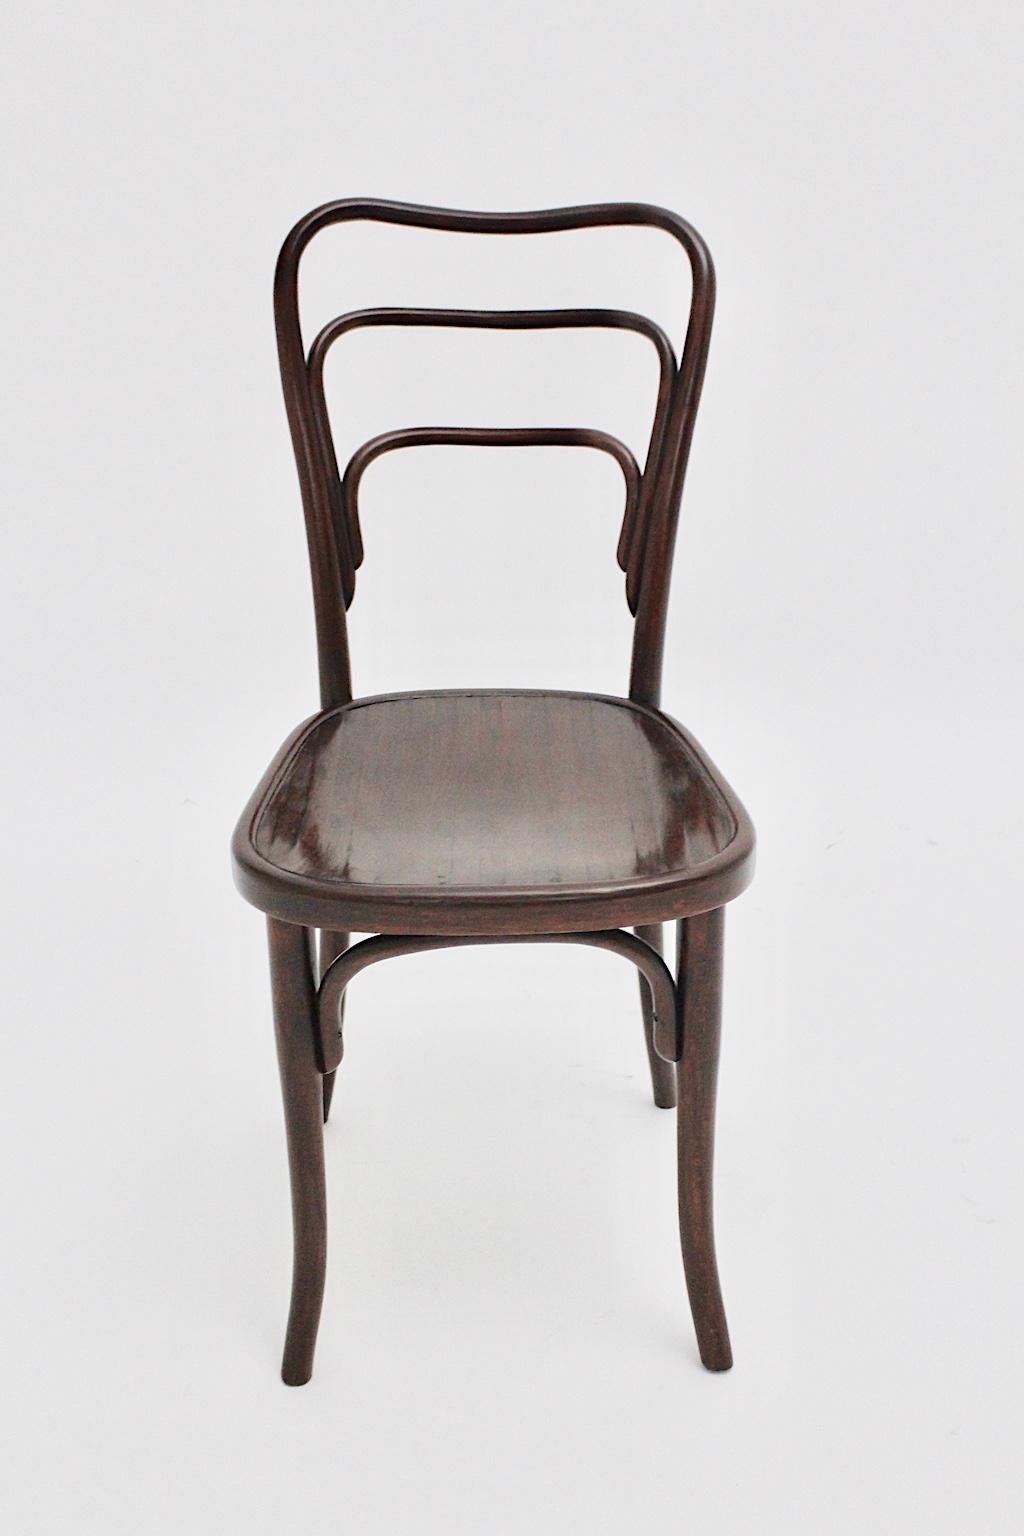 Jugendstil bentwood chair Model No. 249 a by J. & J. Kohn is a variant from the designed interior chair by Adolf Loos for the famed Cafe Museum in the heart of Vienna.
The chair was made of beech bentwood, while the seat was made of plywood. It is